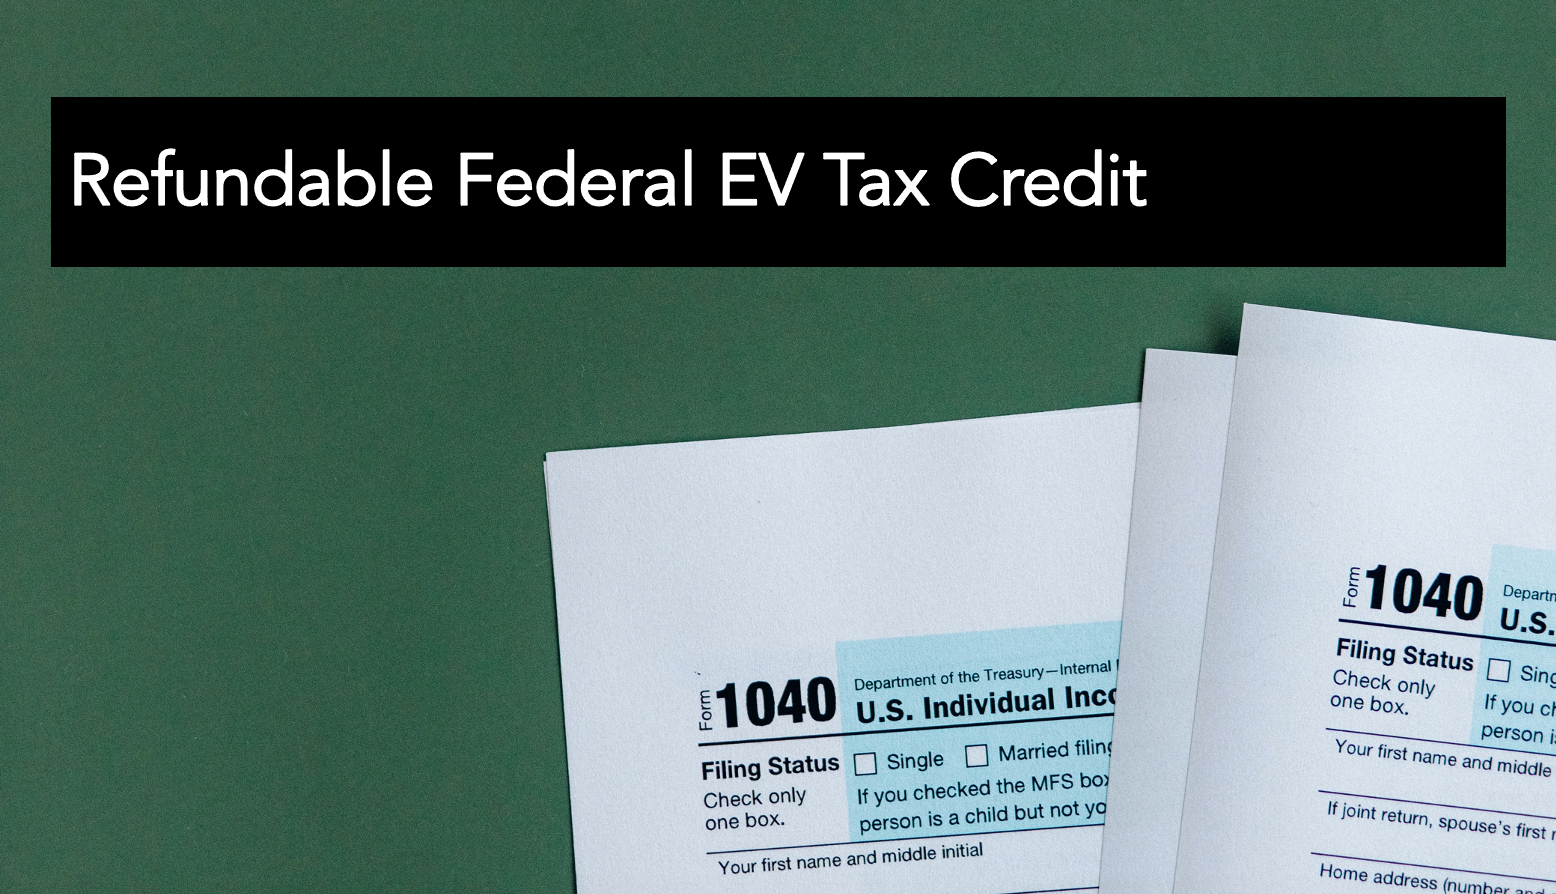 Refundable Federal EV tax credit-featured image